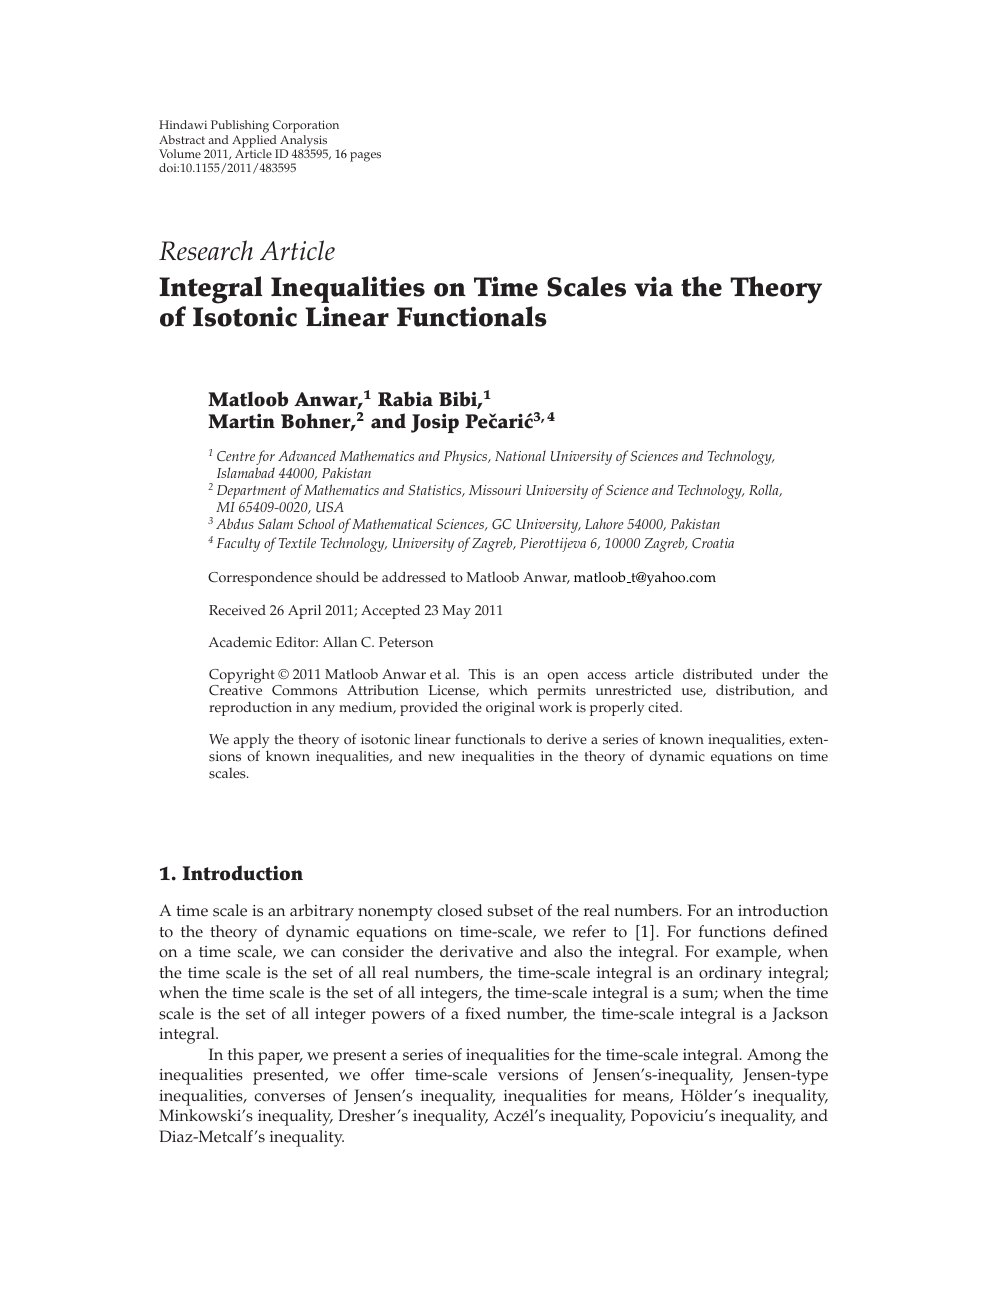 Integral Inequalities On Time Scales Via The Theory Of Isotonic Linear Functionals Topic Of Research Paper In Mathematics Download Scholarly Article Pdf And Read For Free On Cyberleninka Open Science Hub